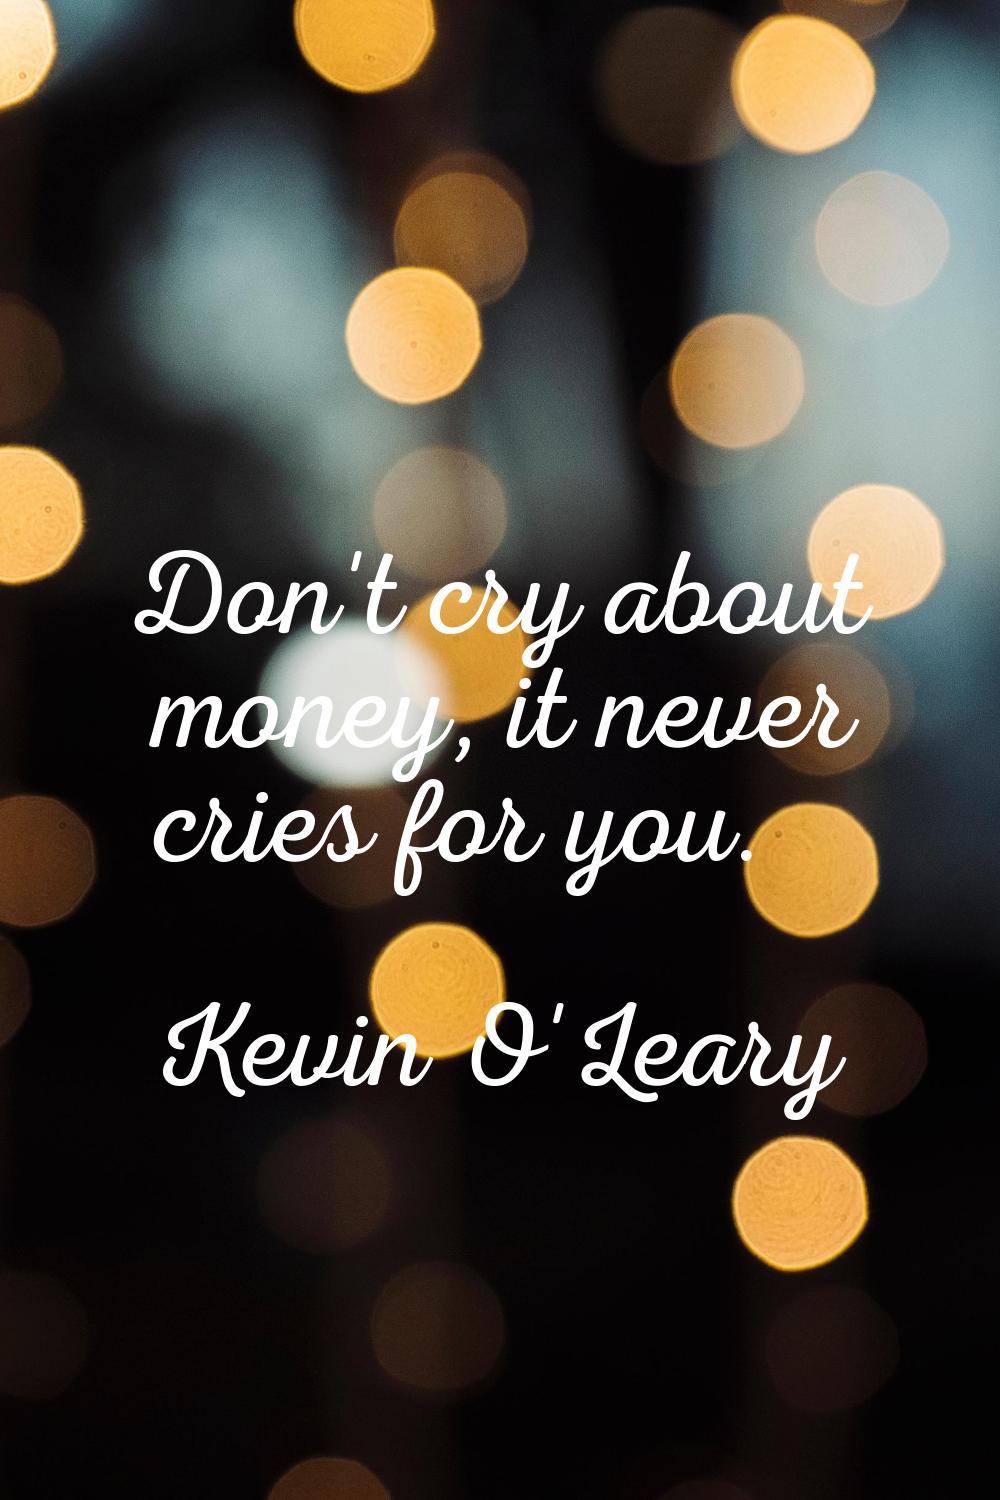 Don't cry about money, it never cries for you.